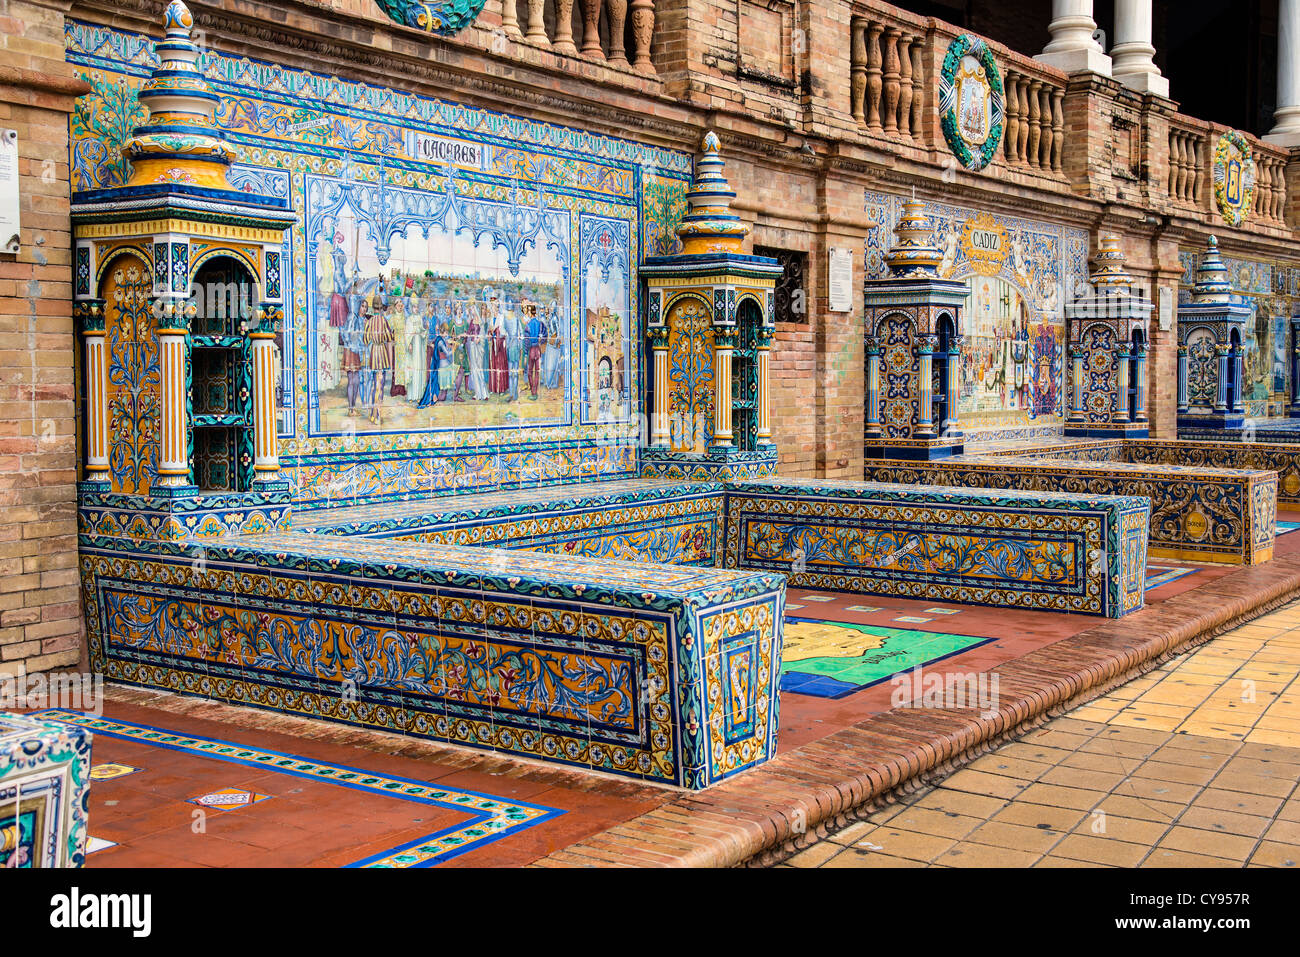 Detail of the tiled spanish provinces alcoves along the walls of the Plaza de España, Seville, Andalusia, Spain Stock Photo